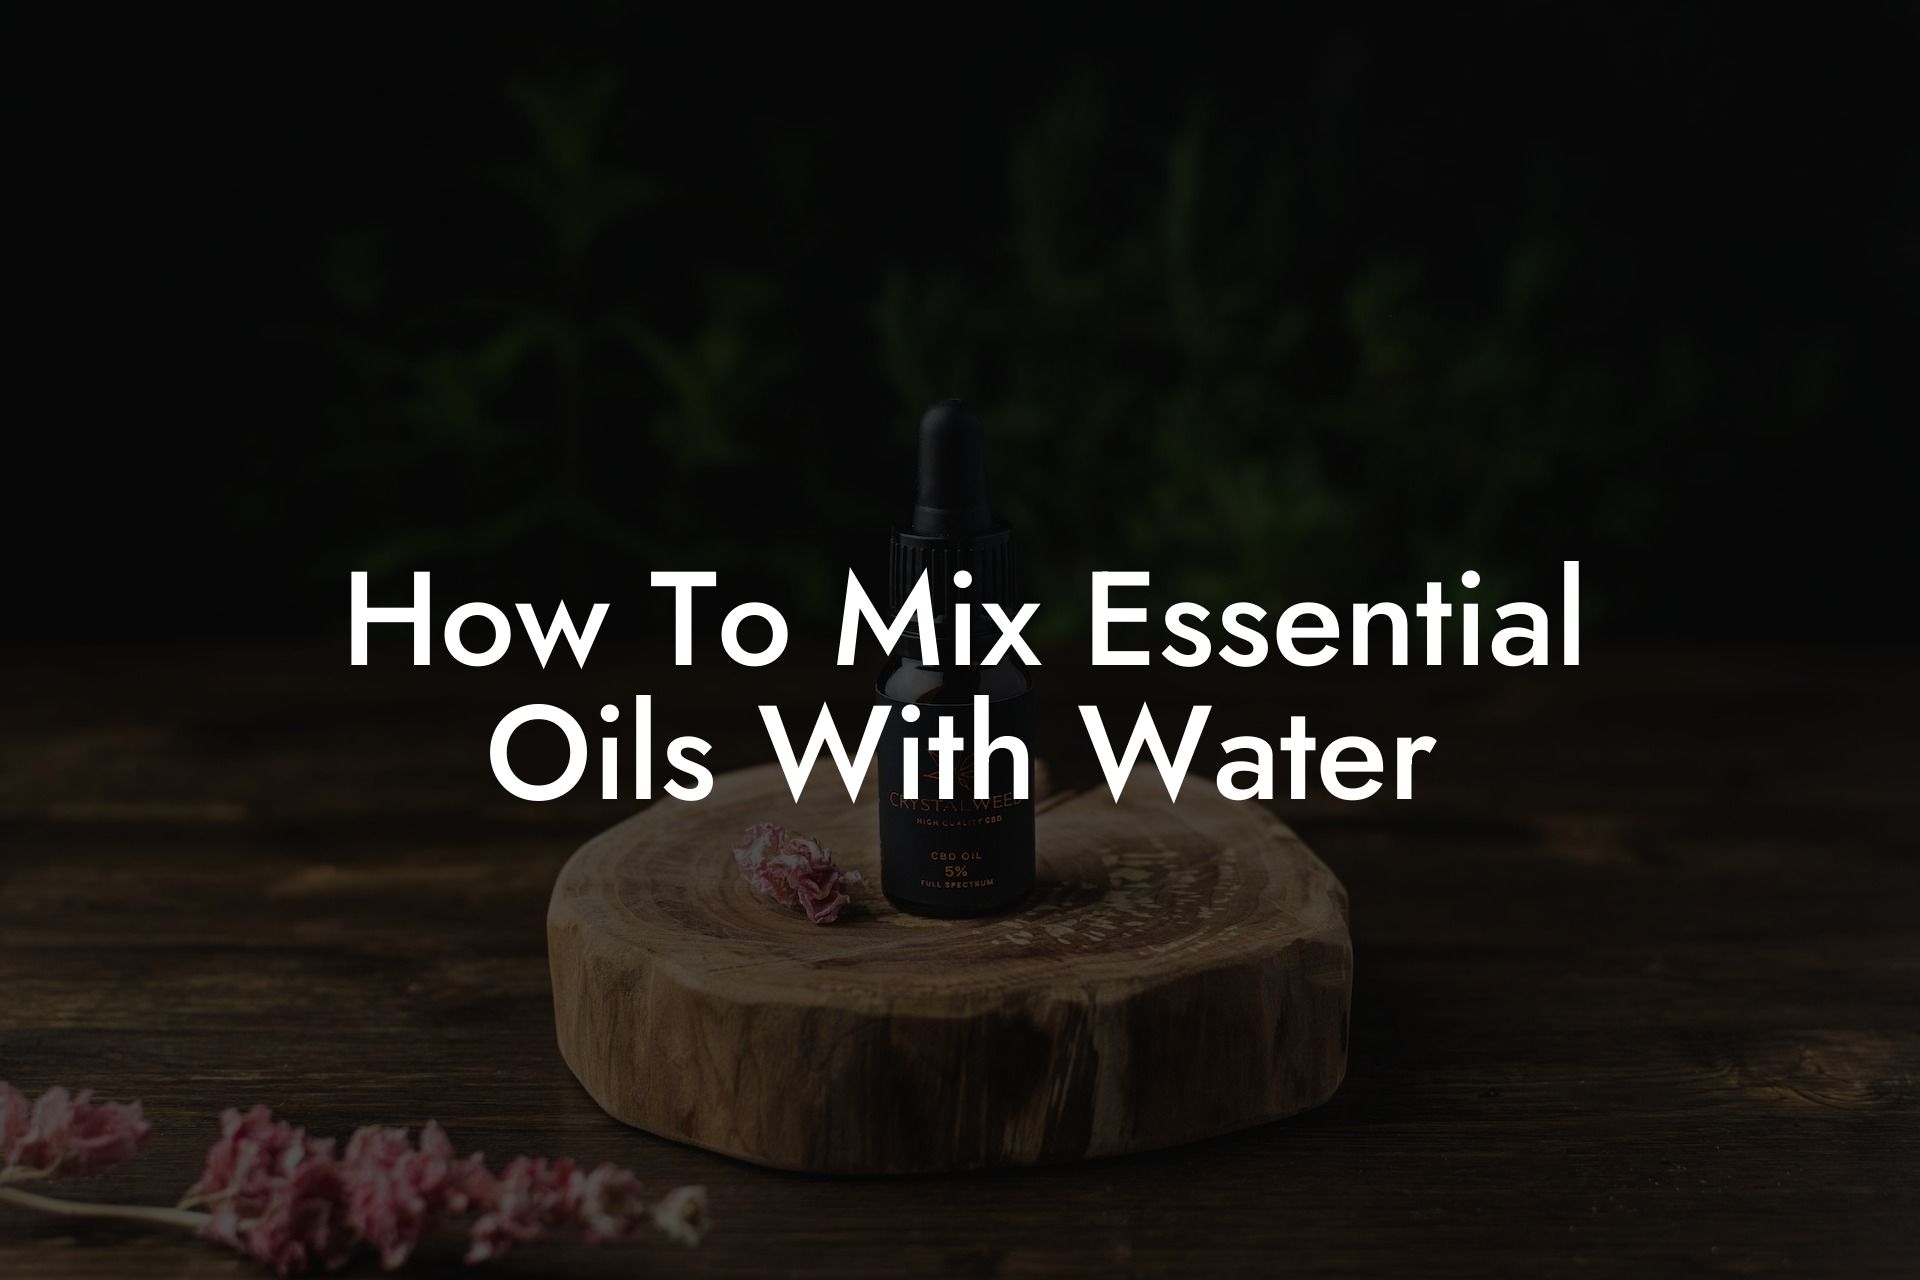 How To Mix Essential Oils With Water